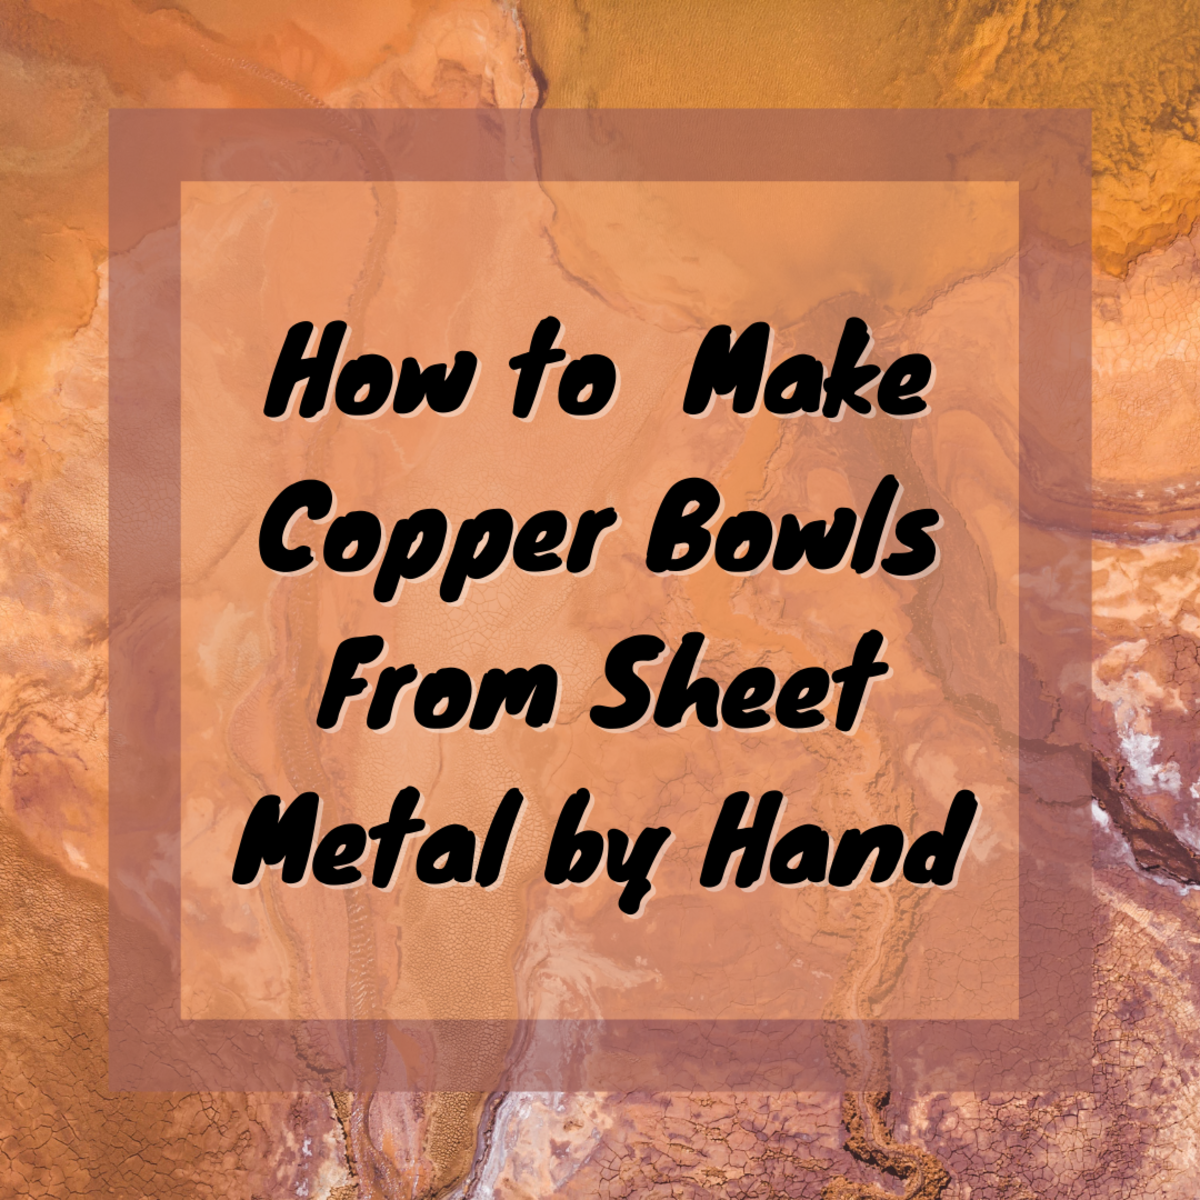 How to Form Copper Bowls From Sheet Metal by Hand